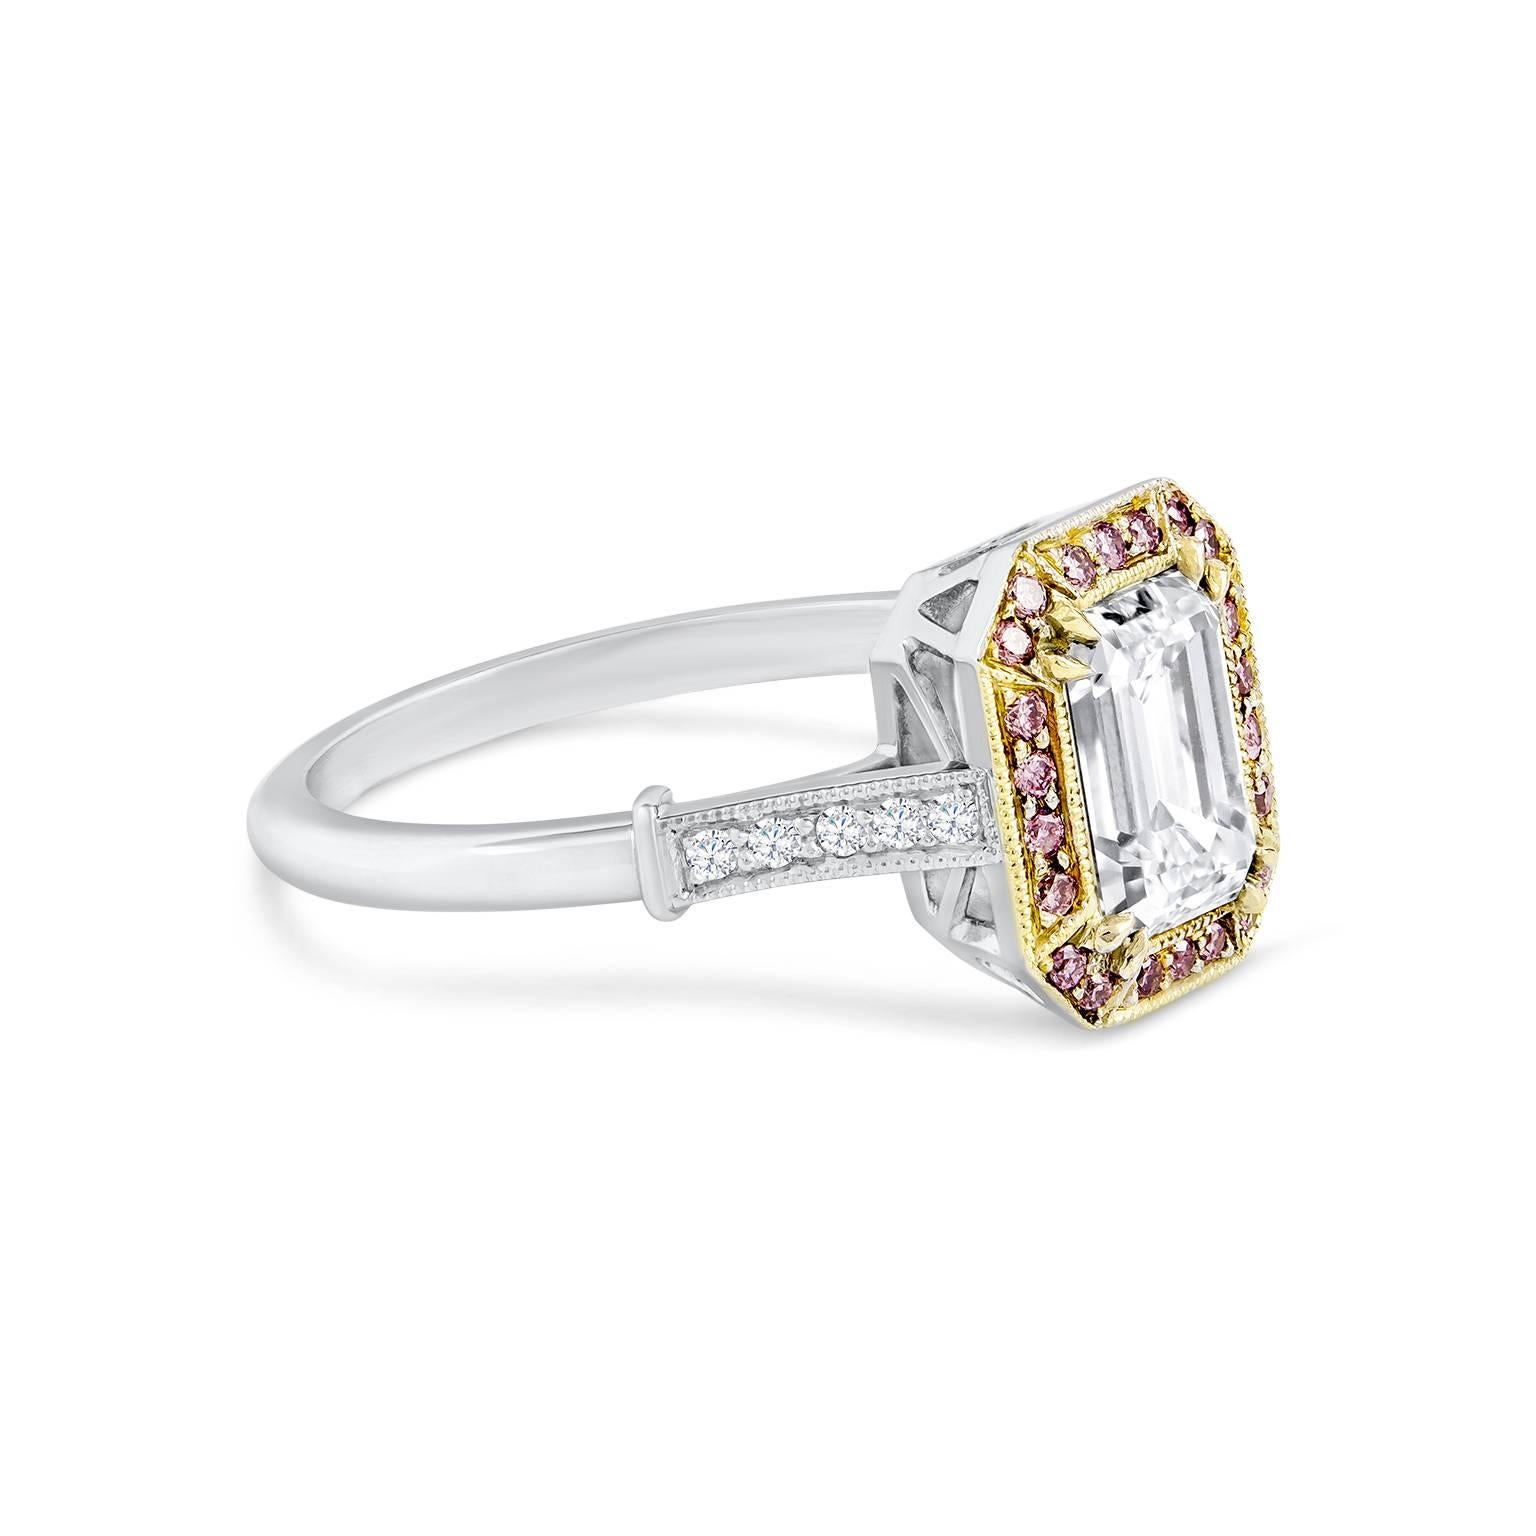 Aa colorful engagement ring designed to have an antique look. Showcasing a gorgeous beautiful 1.52 carat emerald cut diamond that GIA certified as F color, VVS2 clarity. Surrounding the center are 0.15 carats total of pink diamonds set in a yellow